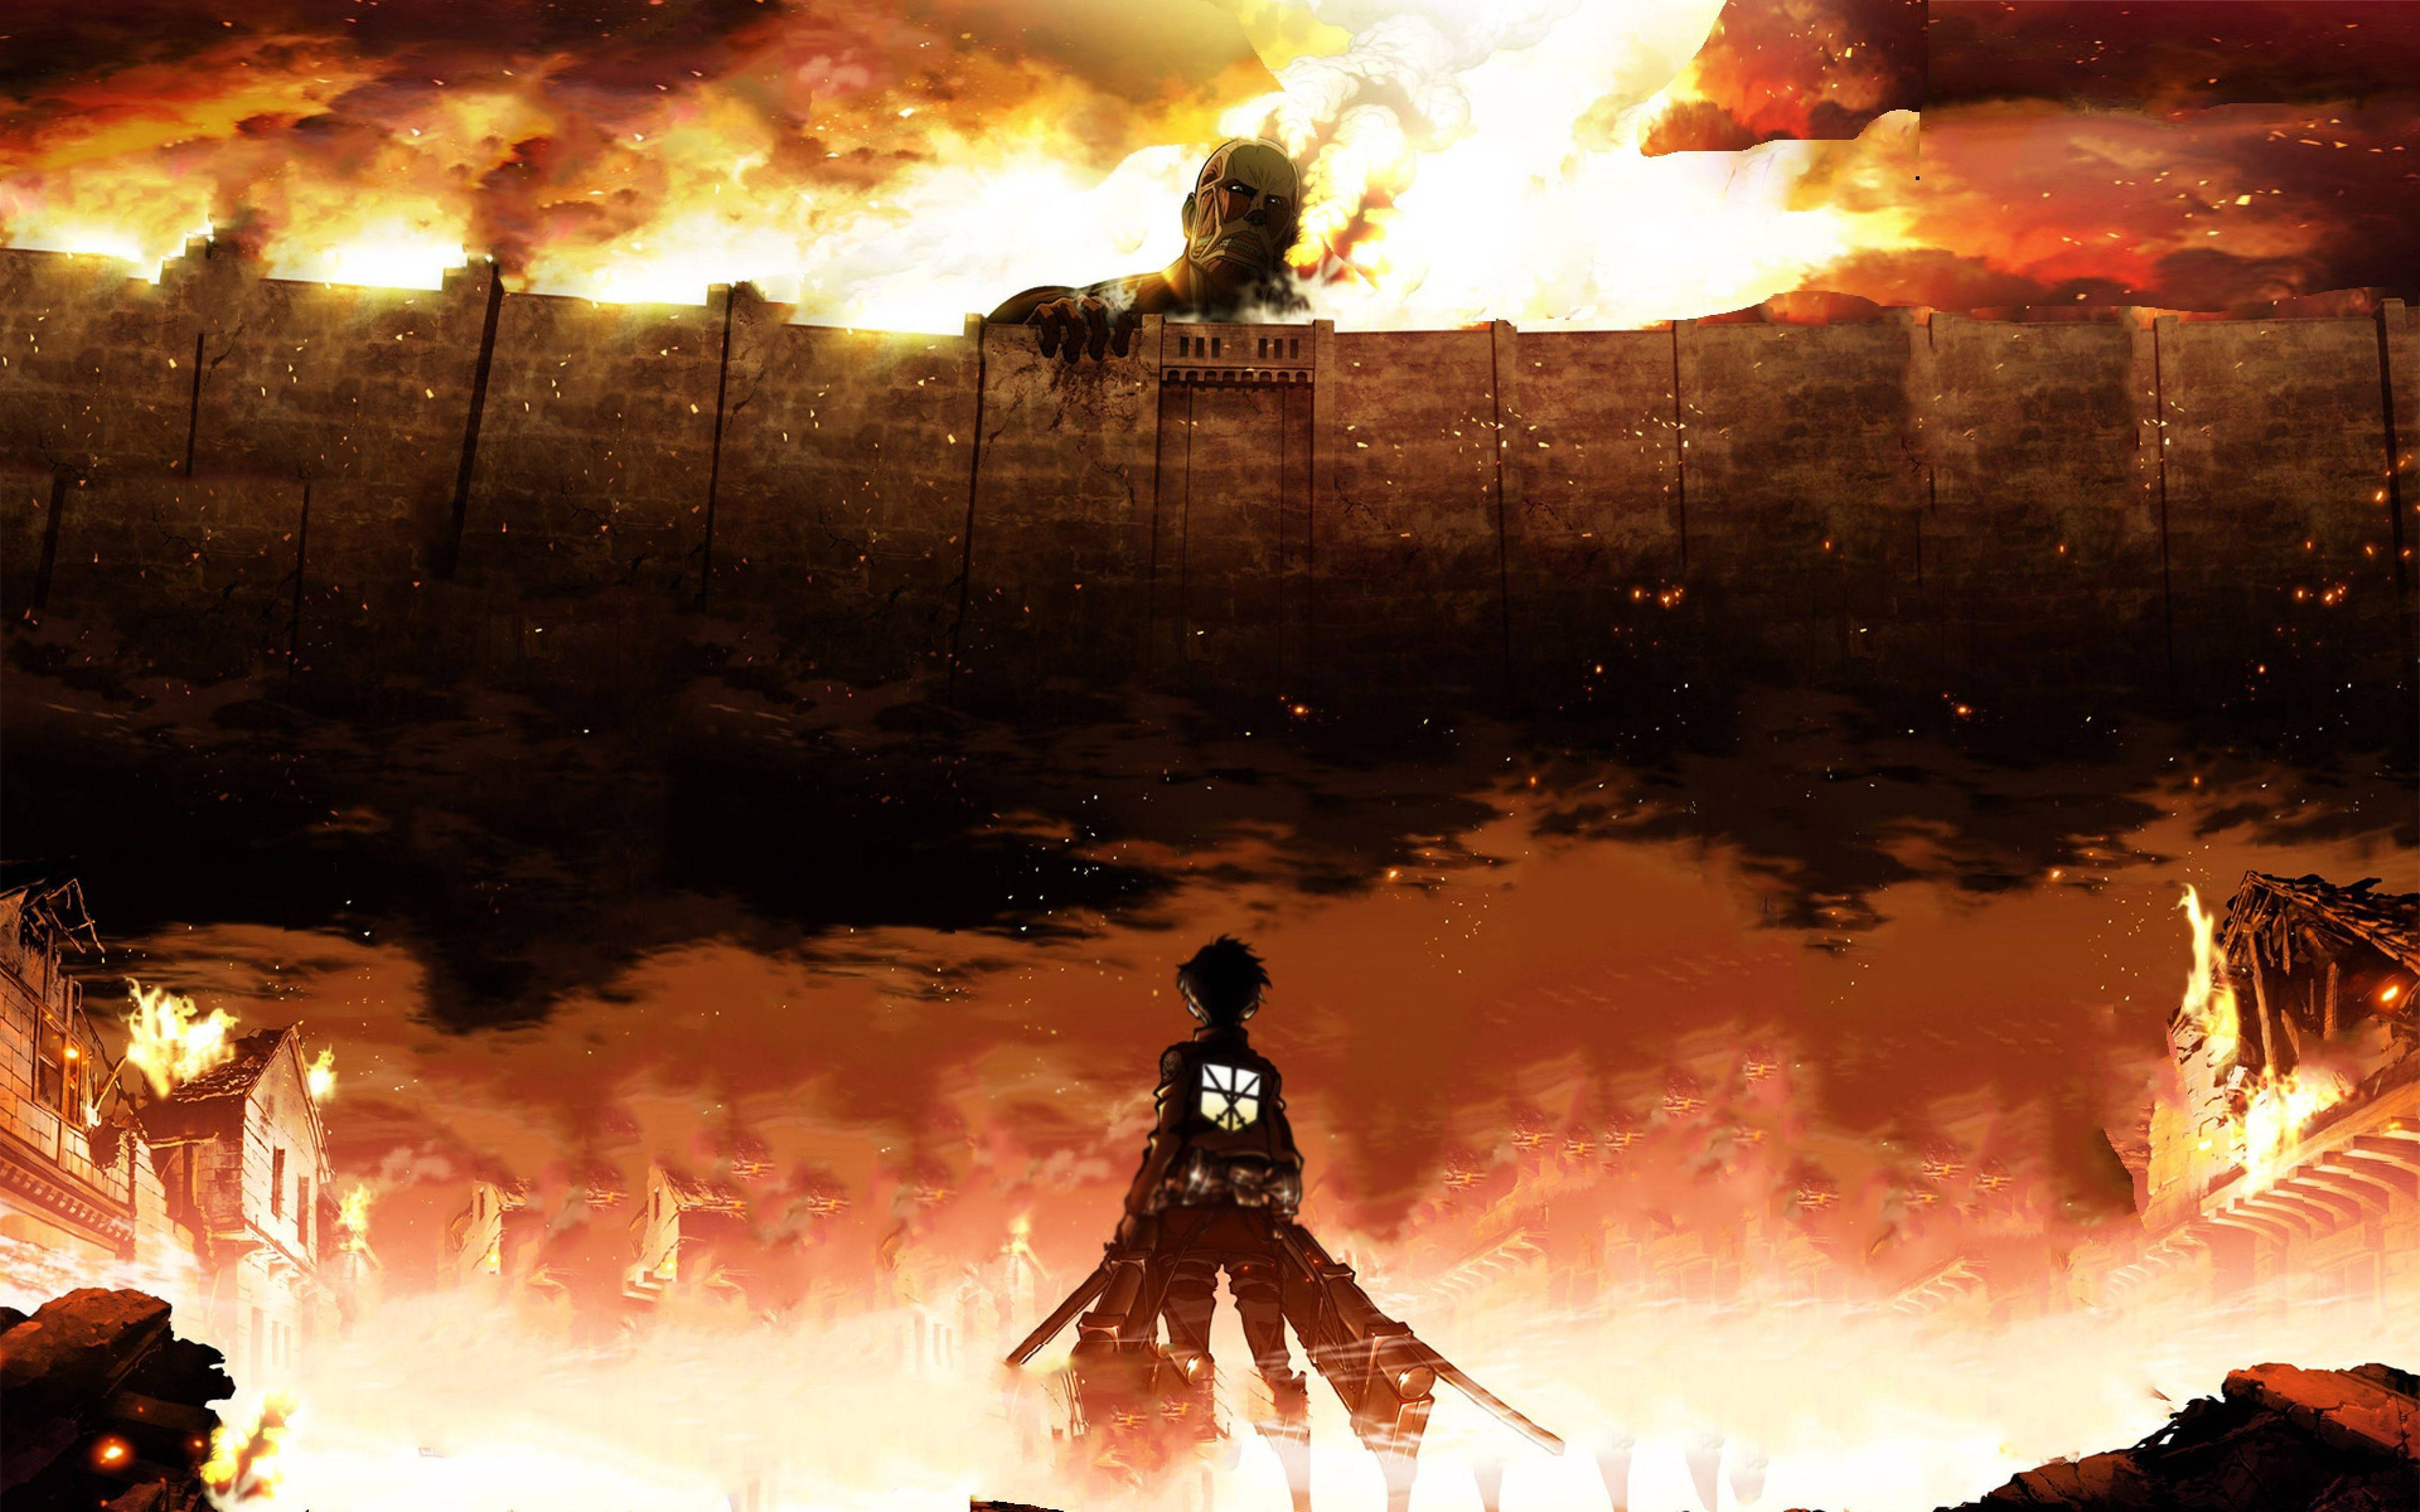 Intense Moment From Attack On Titans 4k, Featuring Eren In Steam Titan Form Background